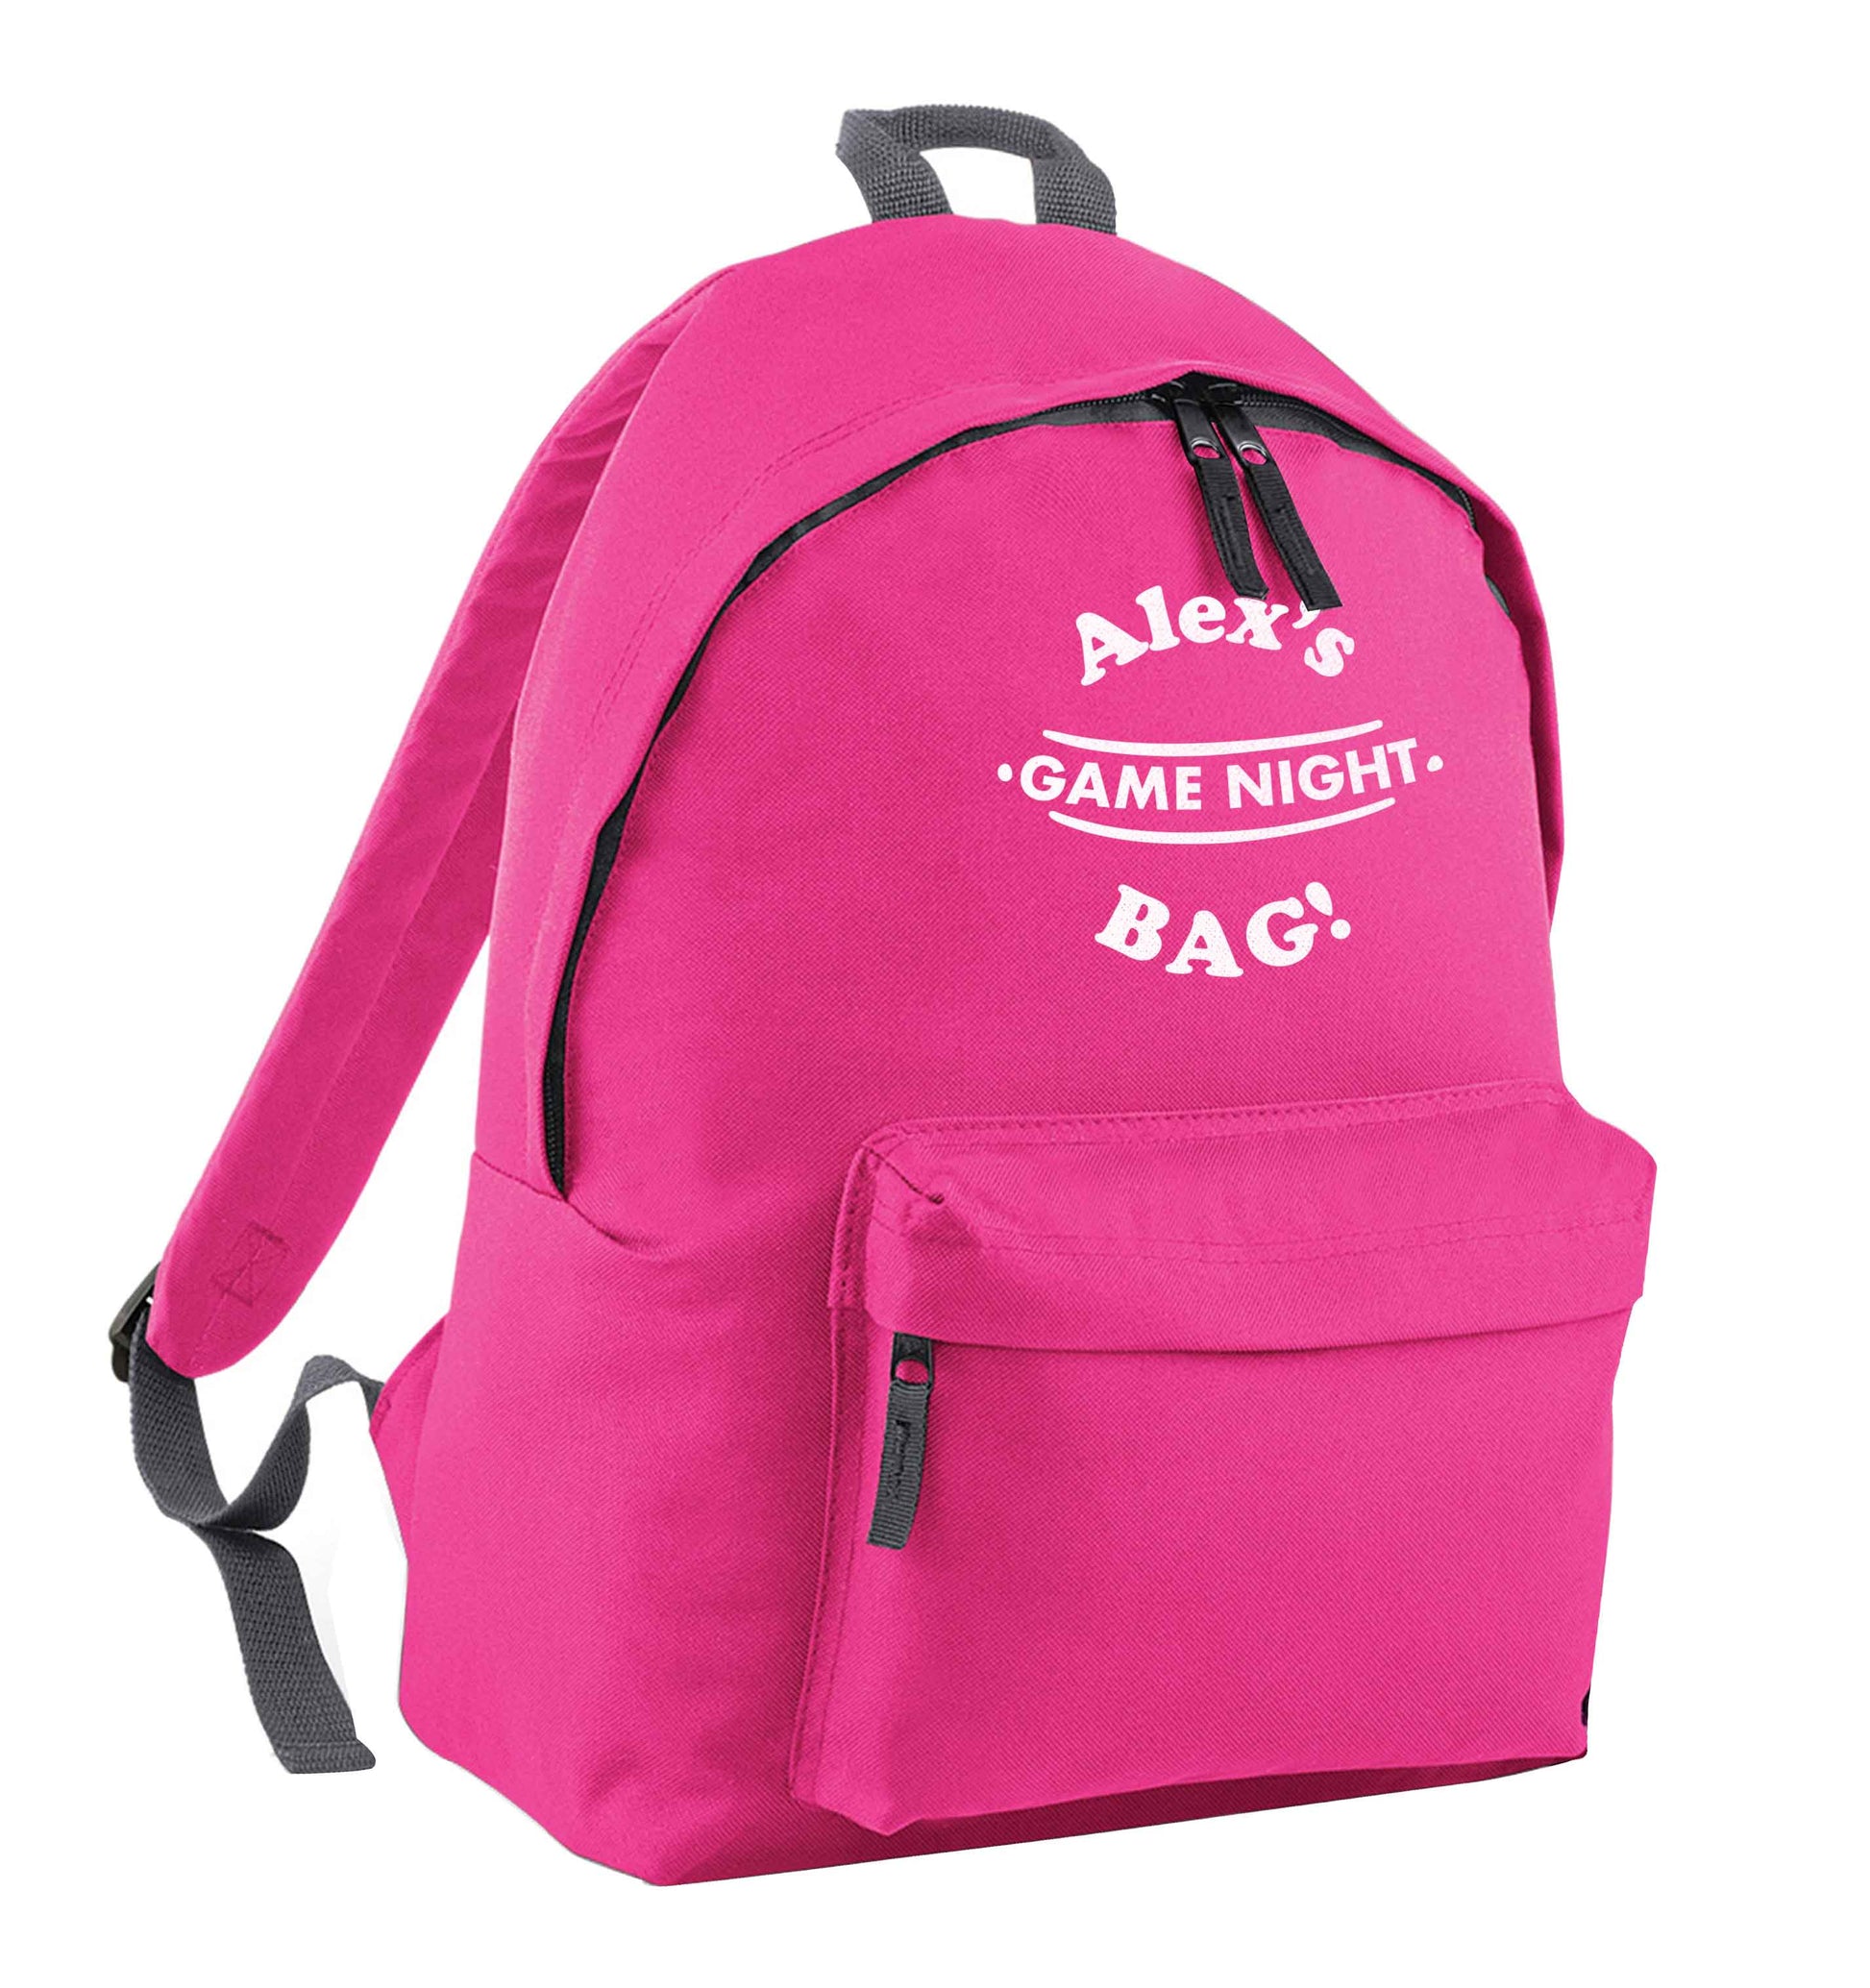 Personalised game night bag pink adults backpack